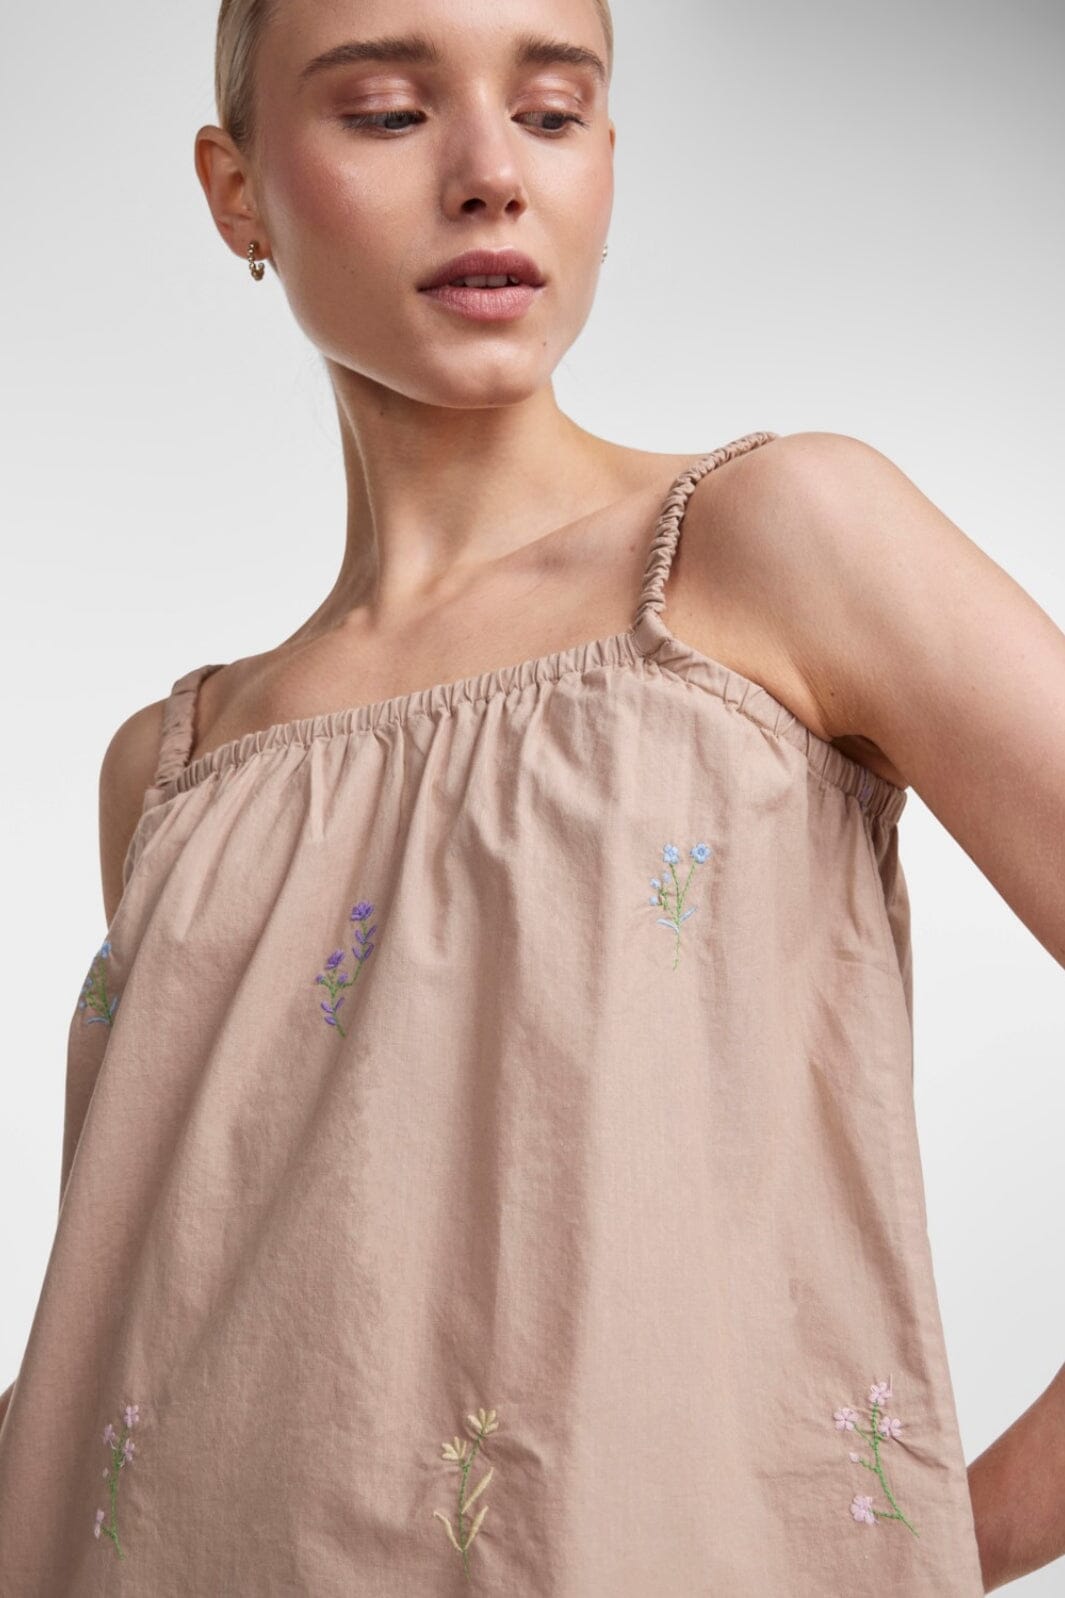 Pieces - Pcjuni Strap Top - 4363075 Nomad EMBROIDERY FLOWER Toppe 